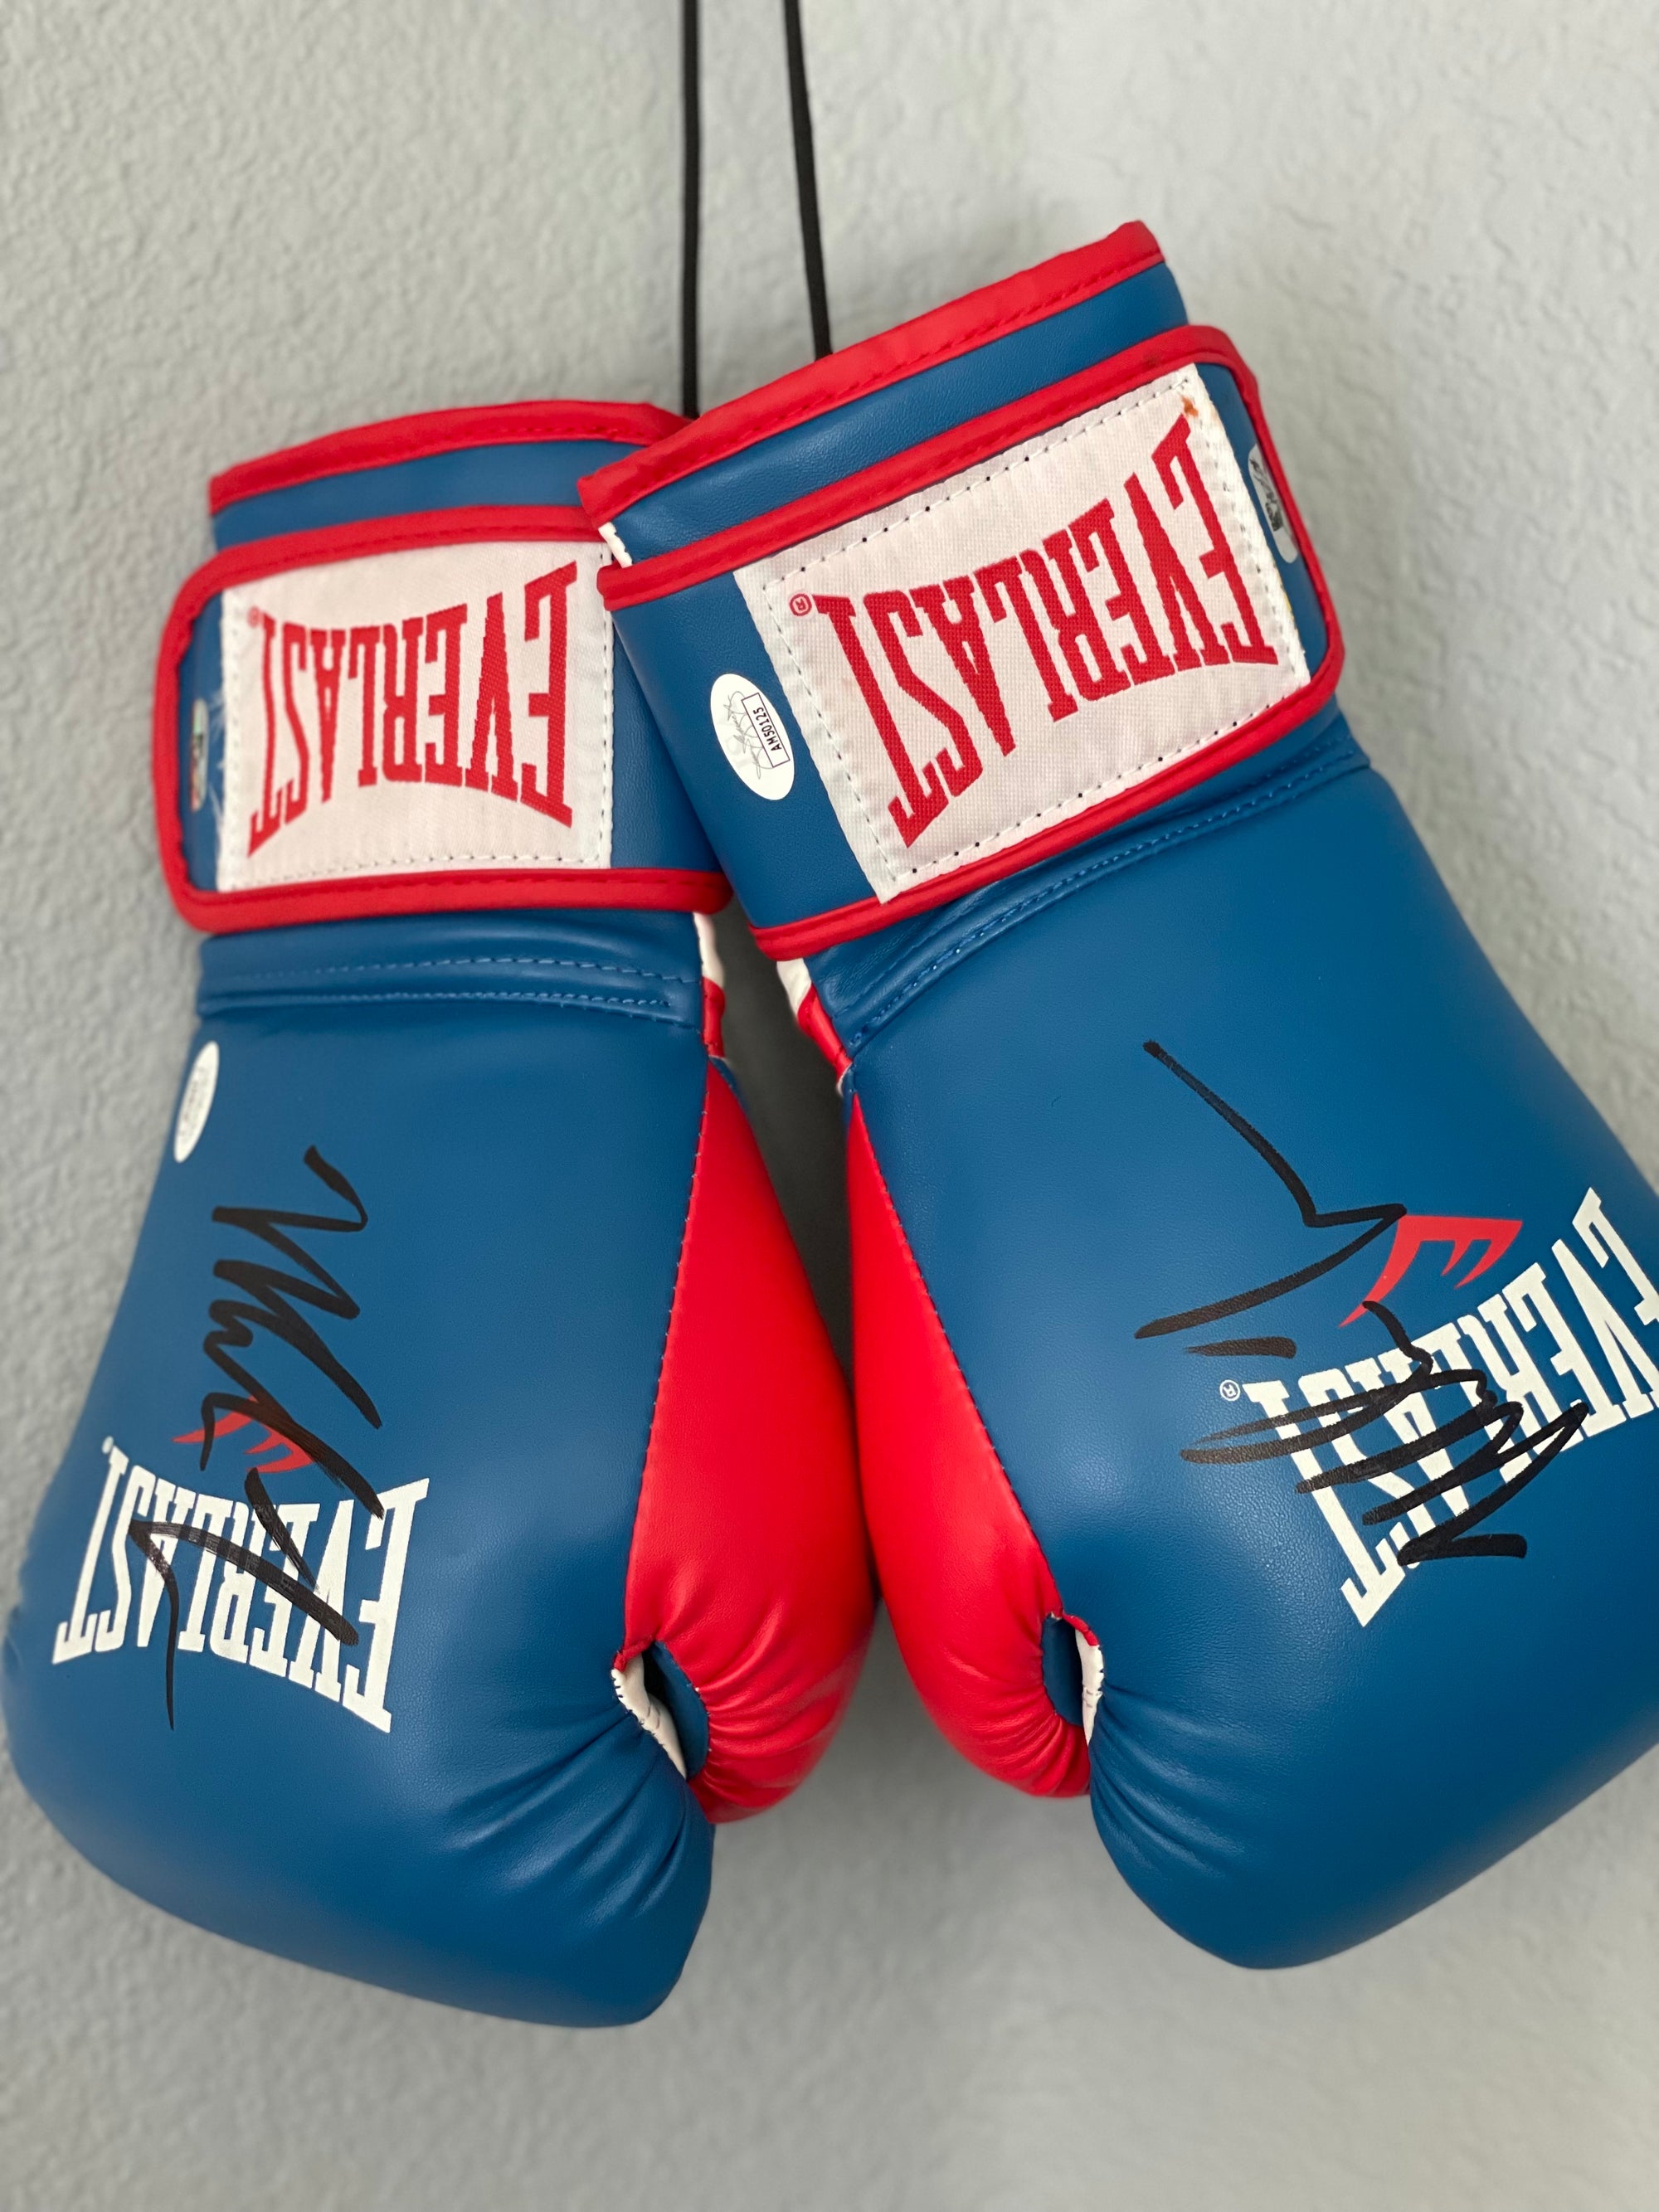 Mike Tyson Twice-Signed Pair of Everlast Boxing Gloves (JSA & Tyson)